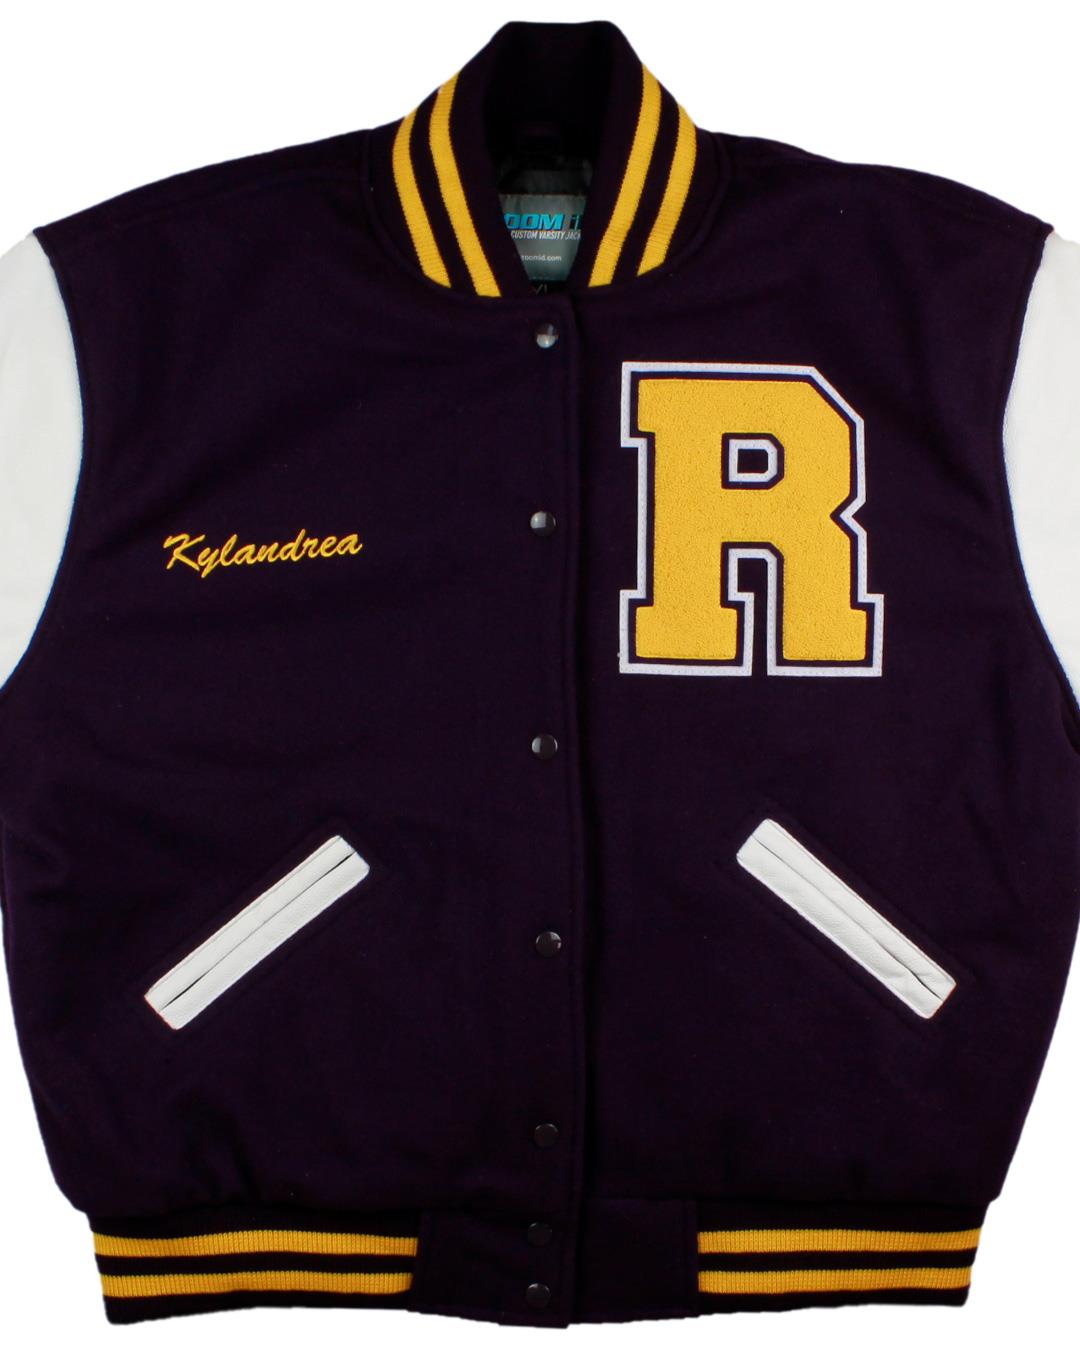 Academy of Richmond County Letterman, Augusta, GA - Front